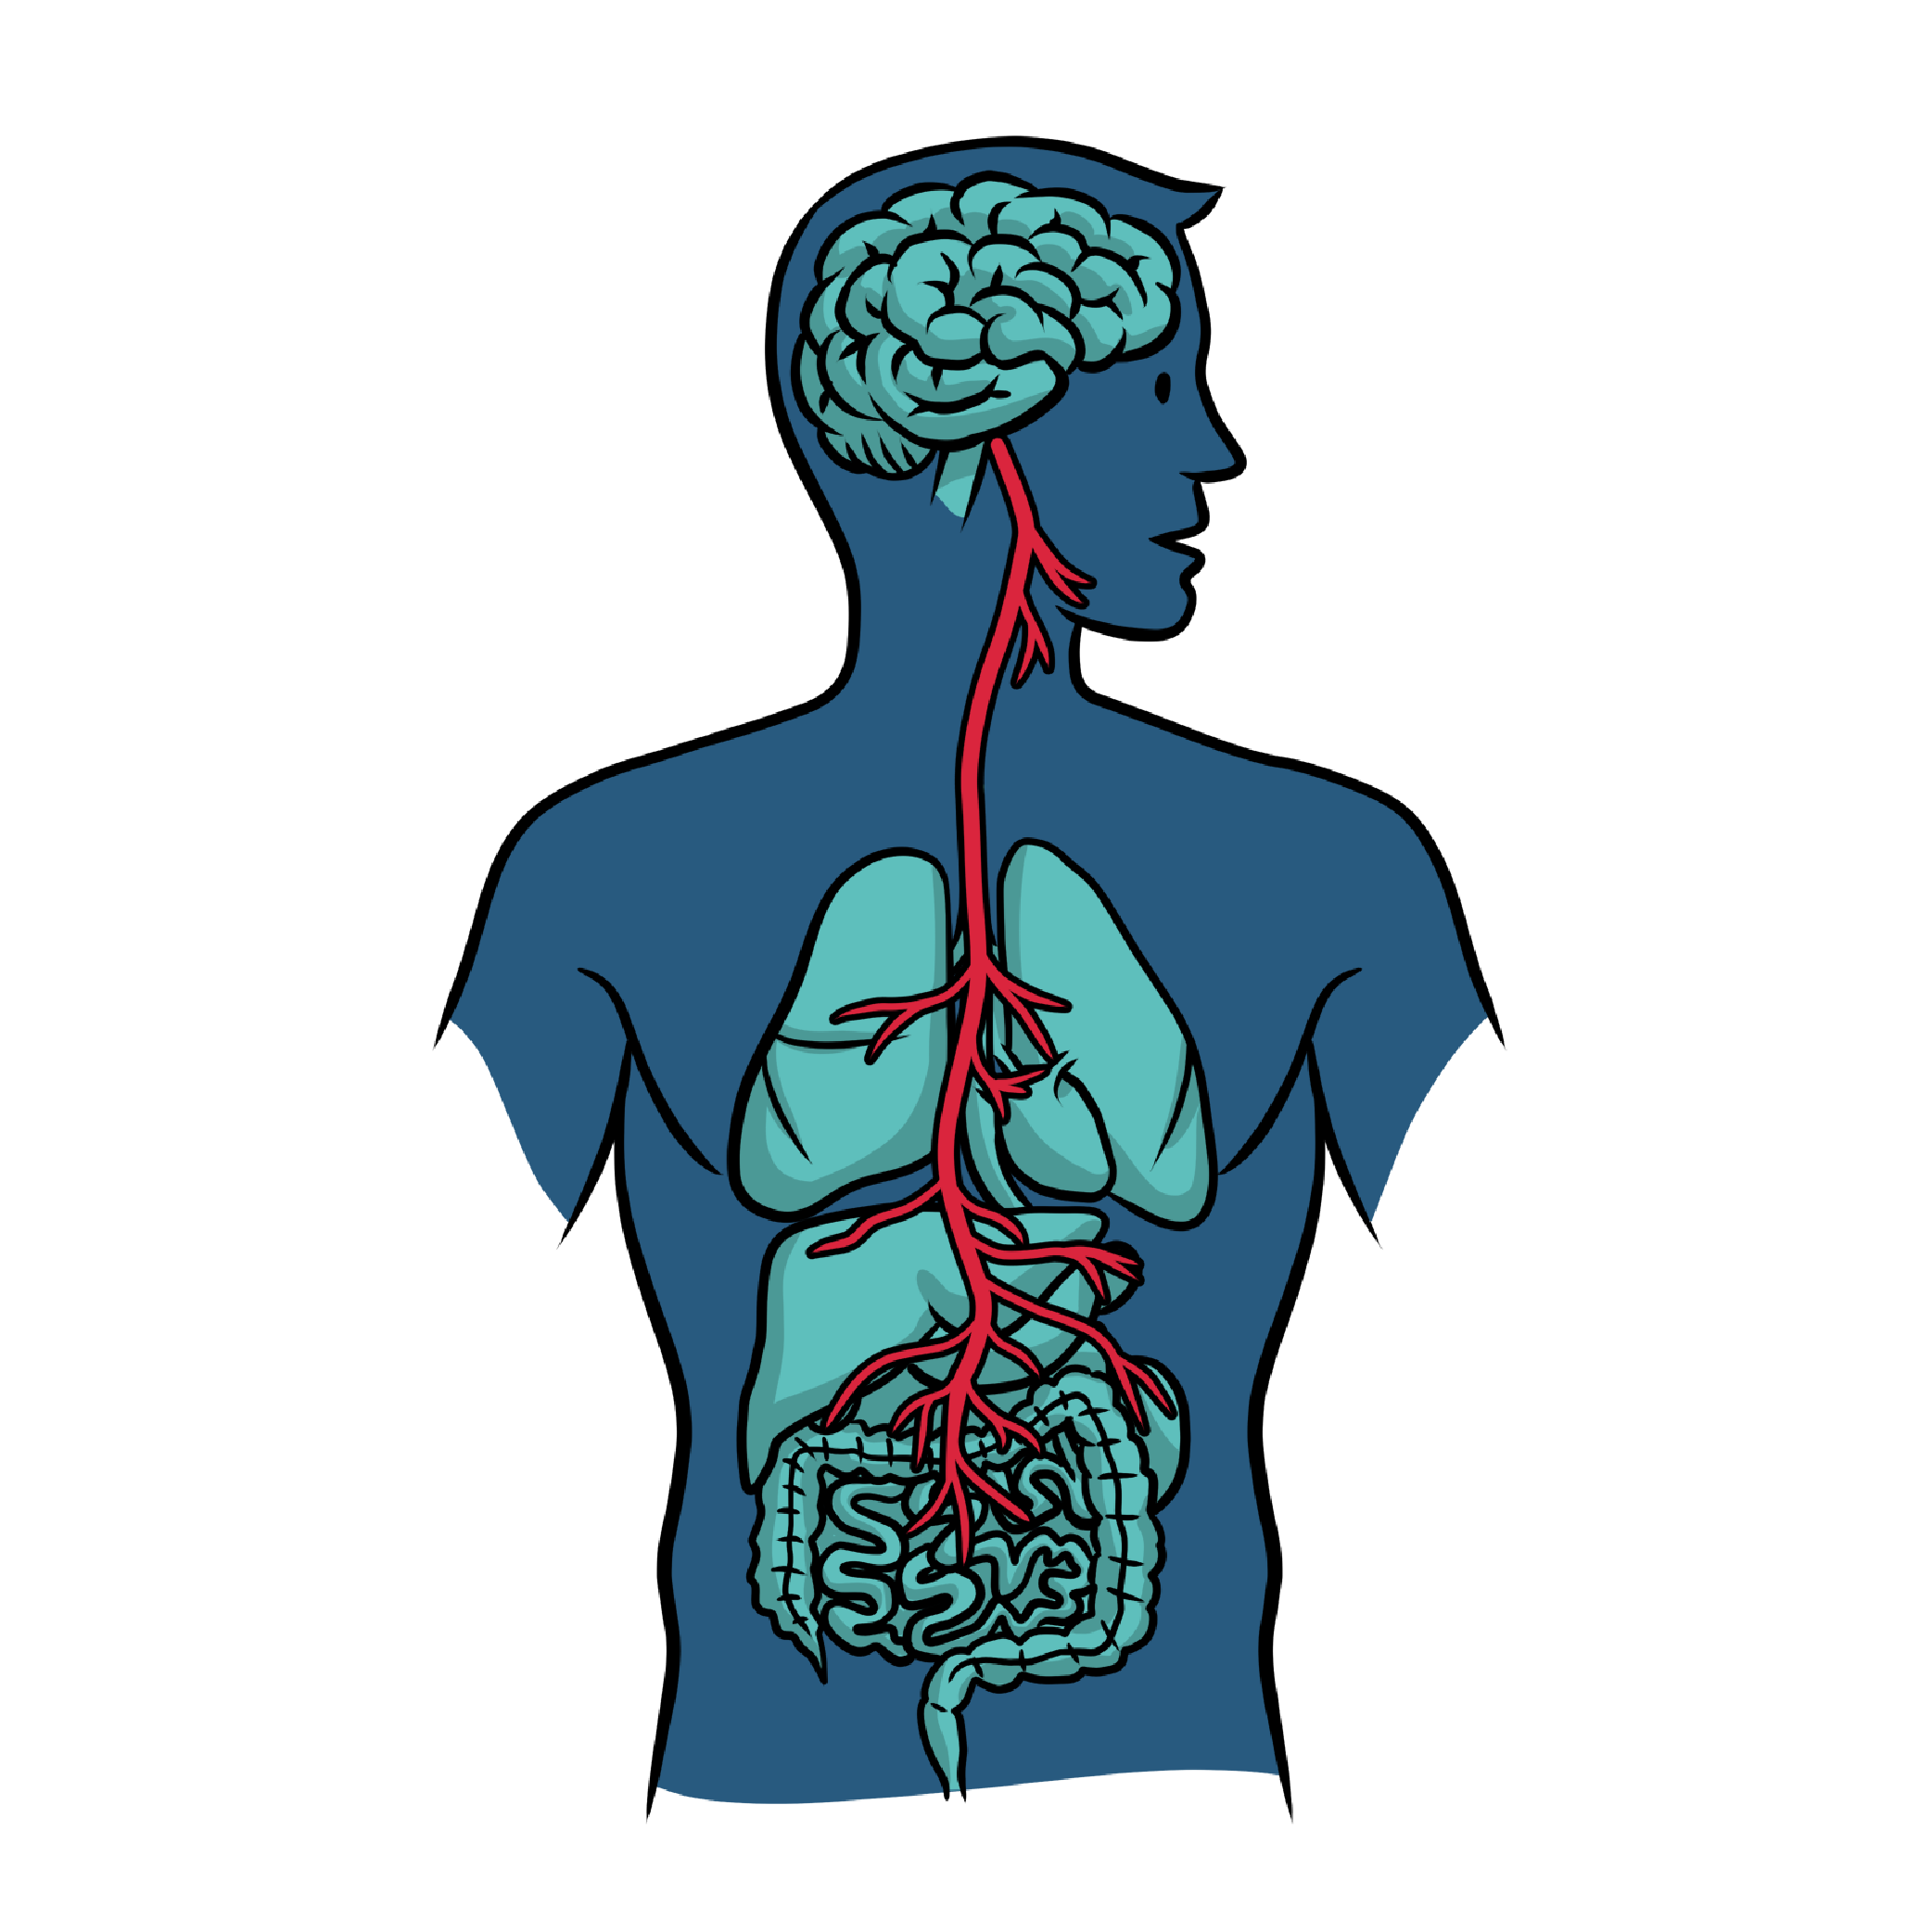 an illustration of the human anatomy showing nerves to indicate staying calm under pressure